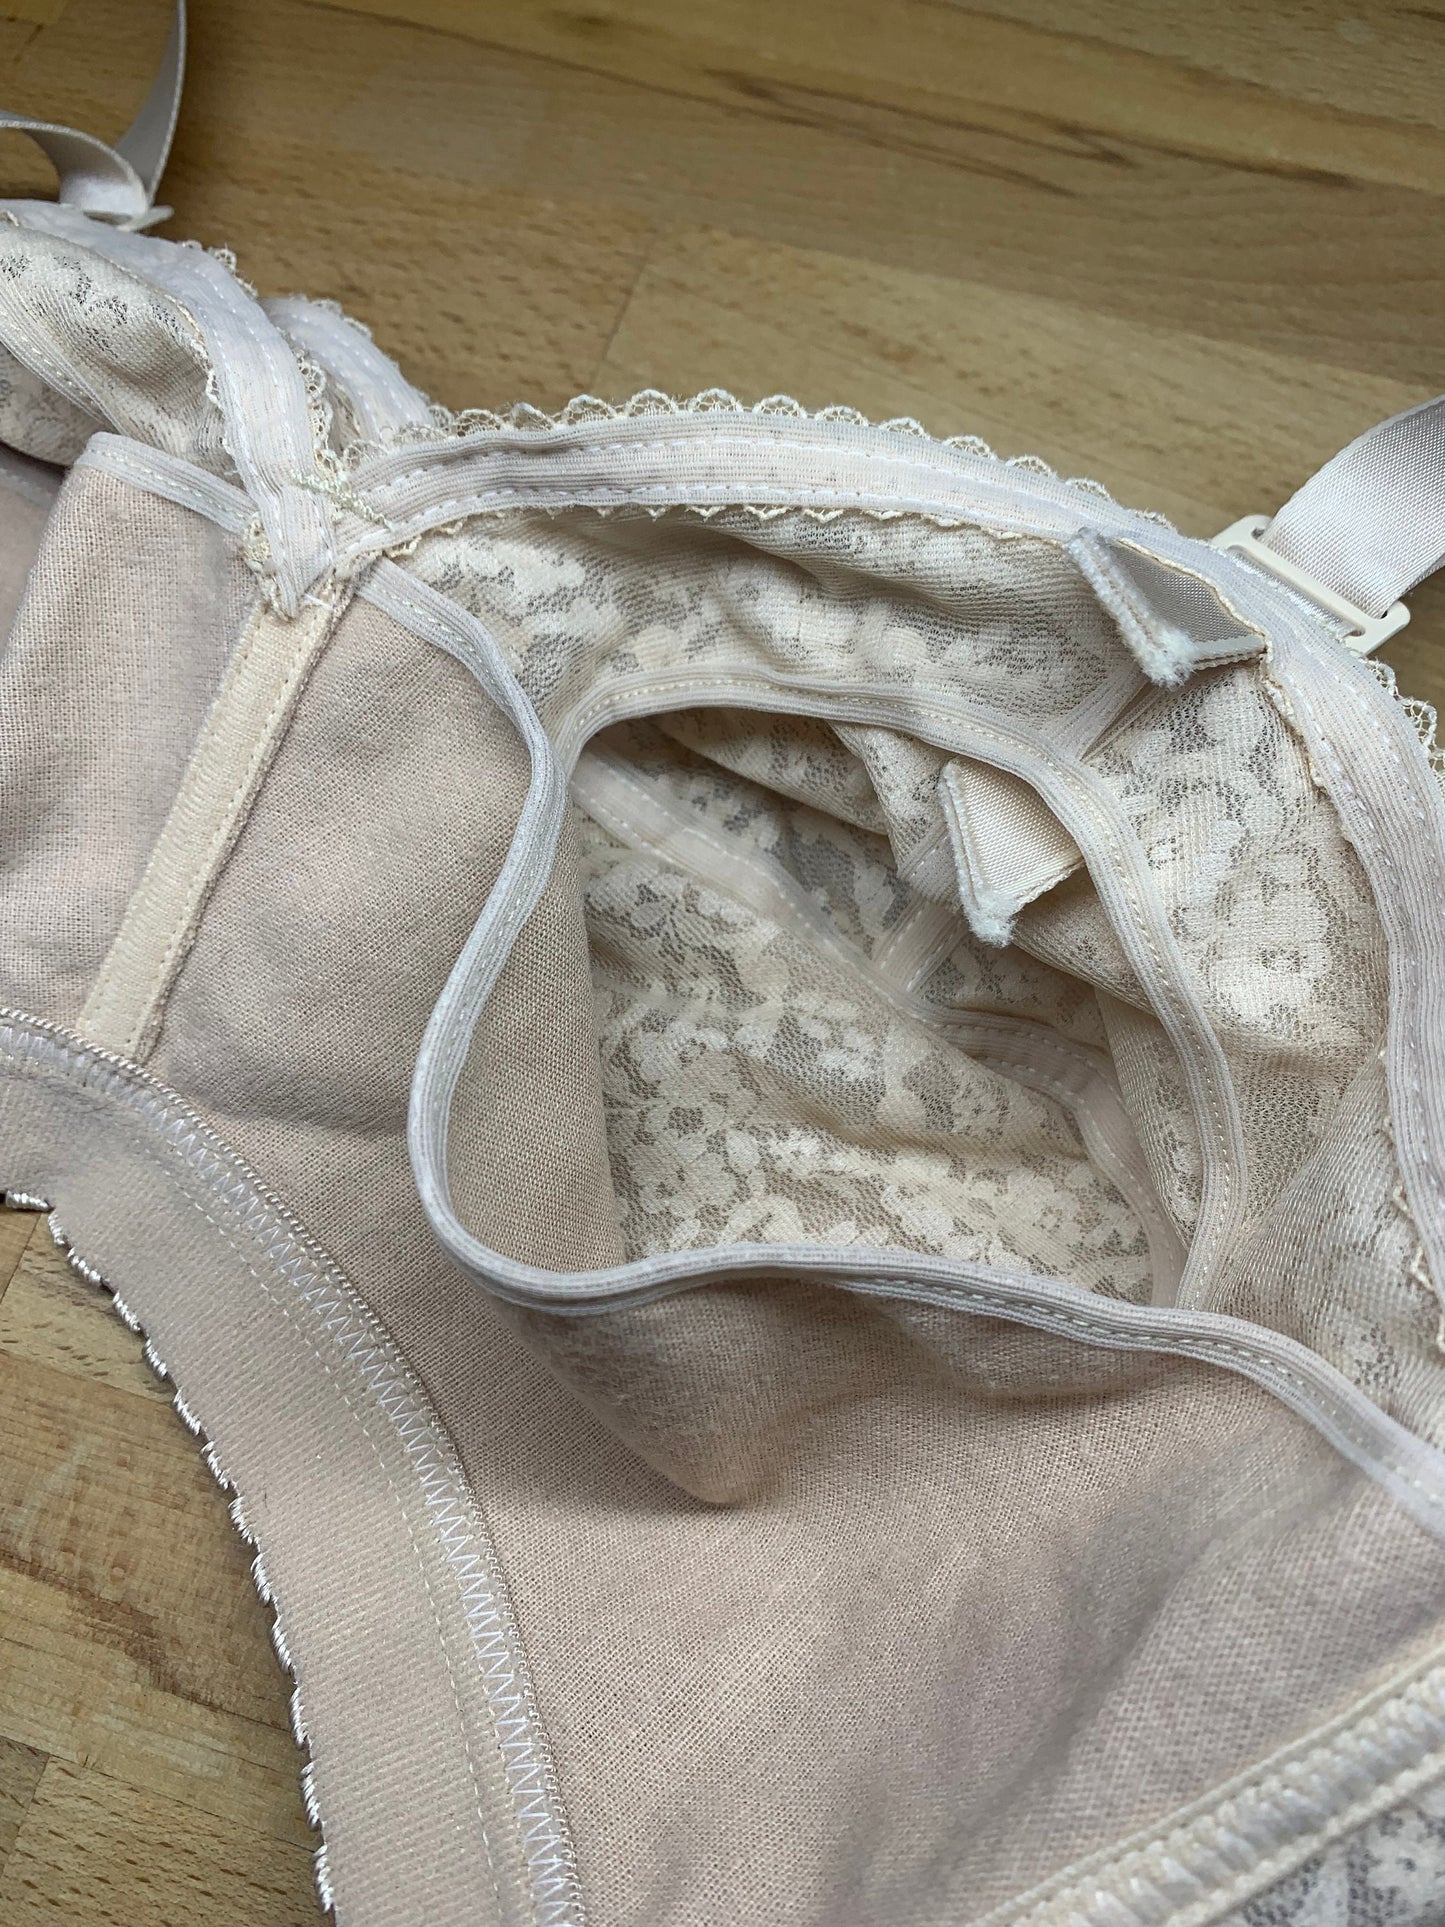 Vintage 1980s Beige Nude Colored Floral Lace and Mesh Padded Soft Cup Bra  by Underscore for JC Penney Retro Lingerie Bra Pin up Burlesque -   Canada